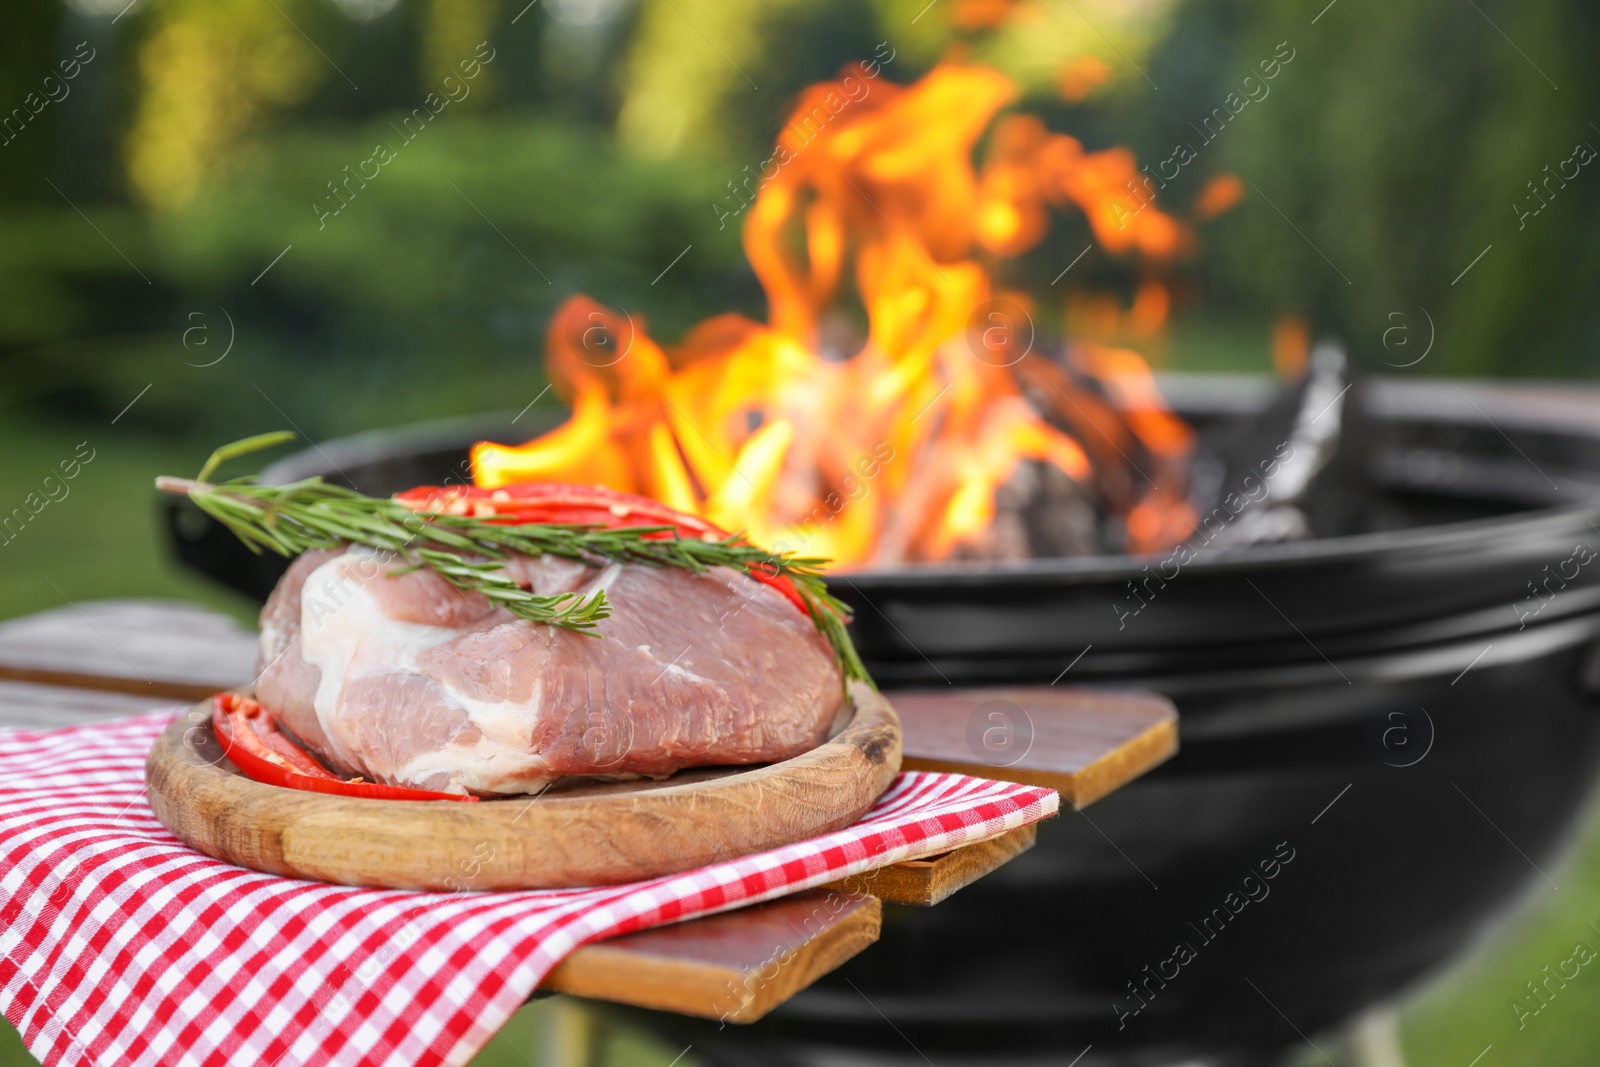 Photo of Raw meat on table near barbecue grill outdoors